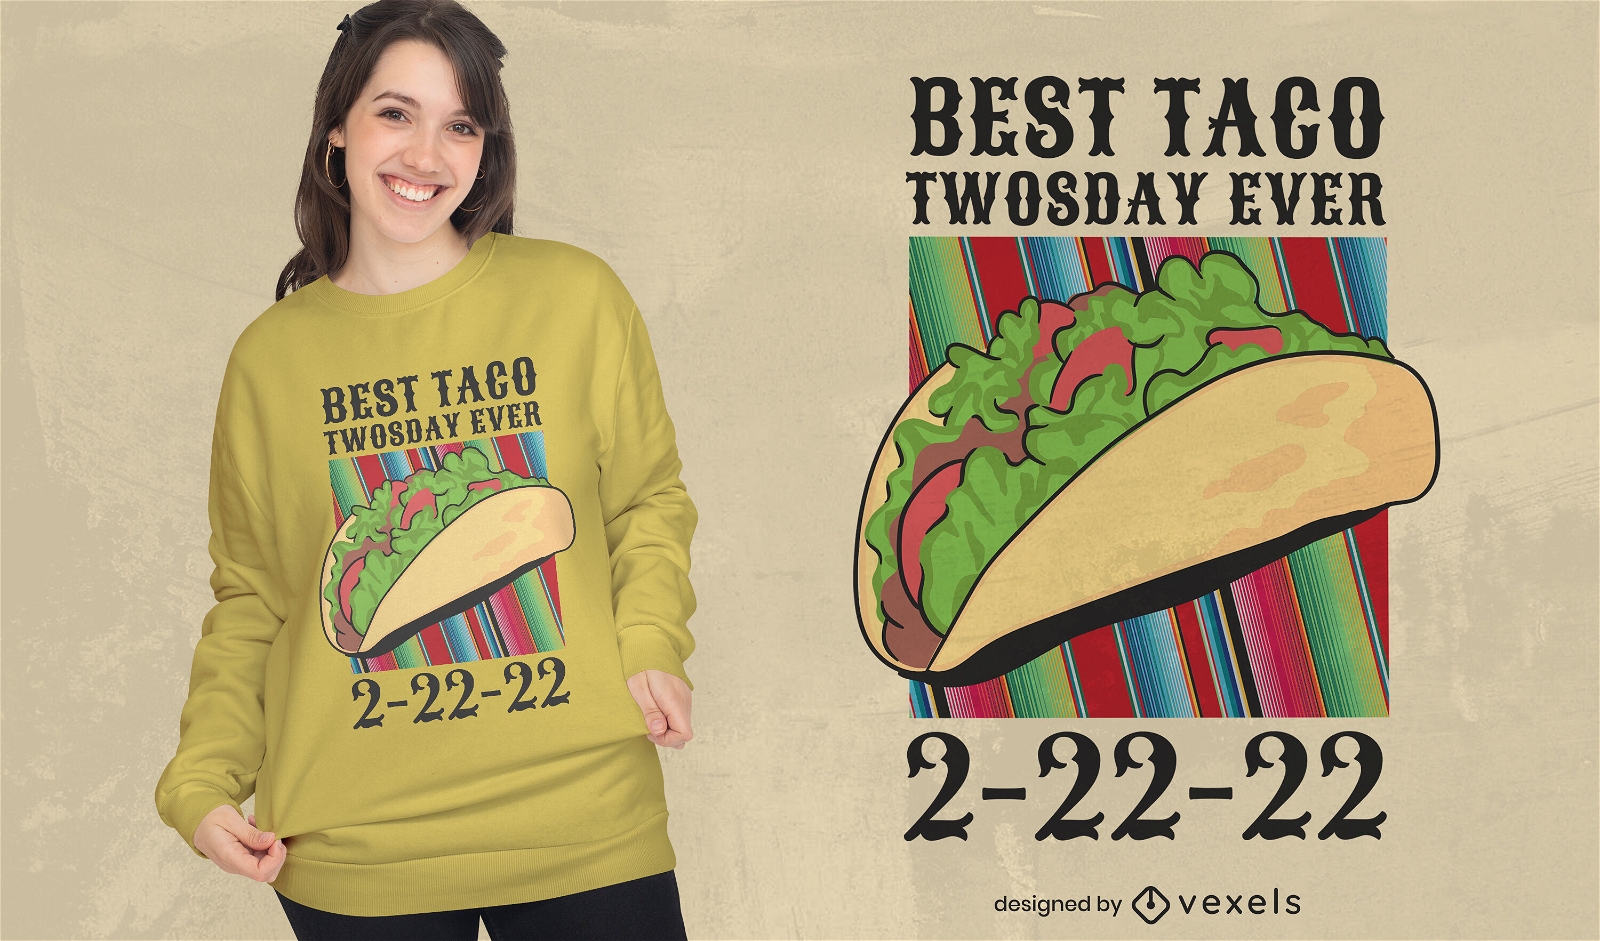 Taco tuesday quote t-shirt design